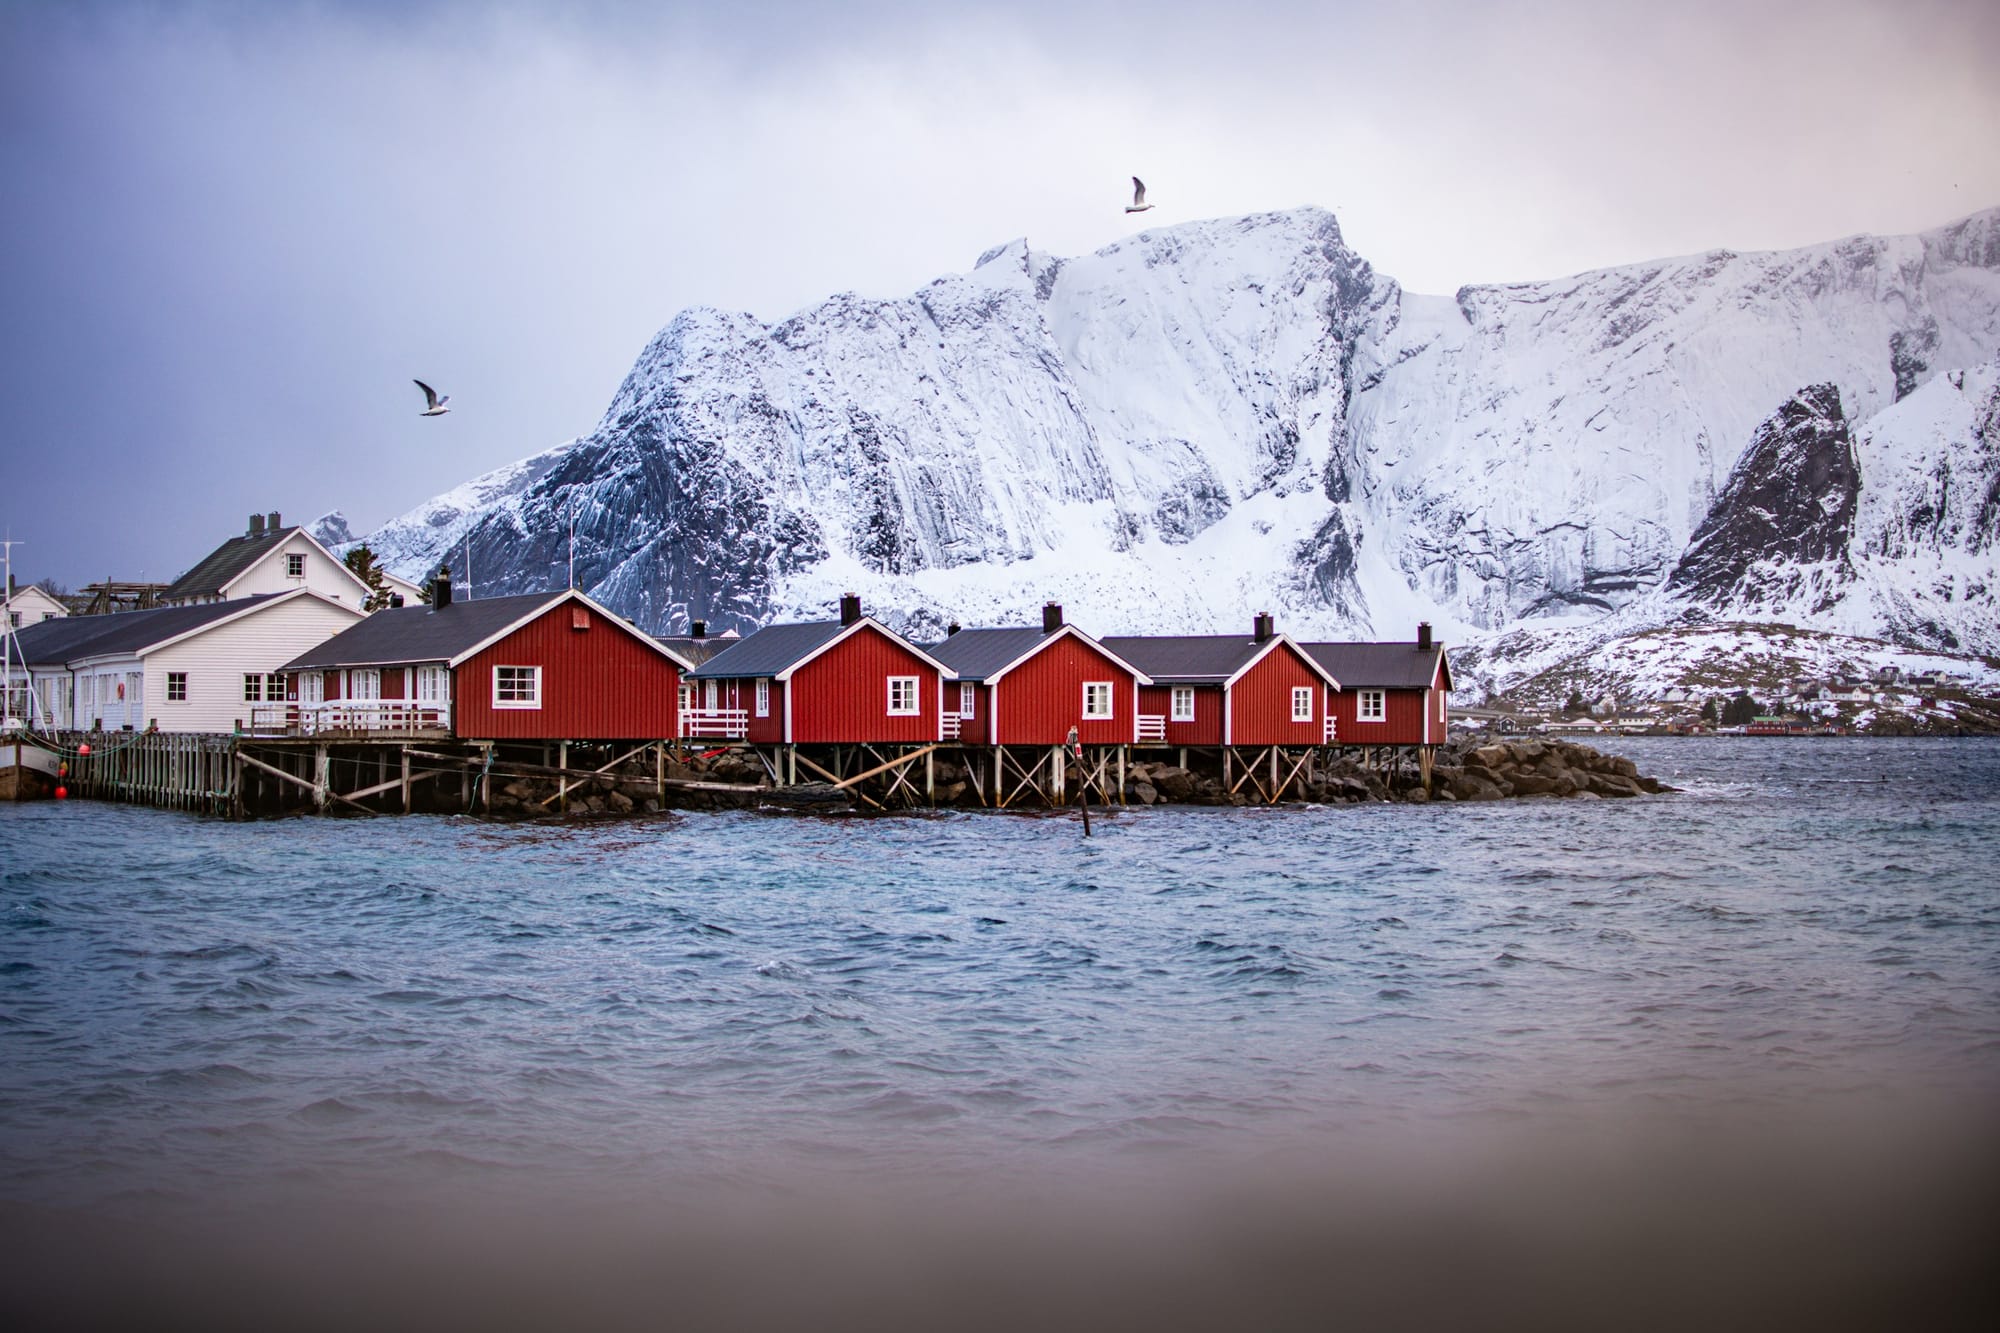 A group of red buildings on the waterfront in Norway with icy/snowy mountains behind them